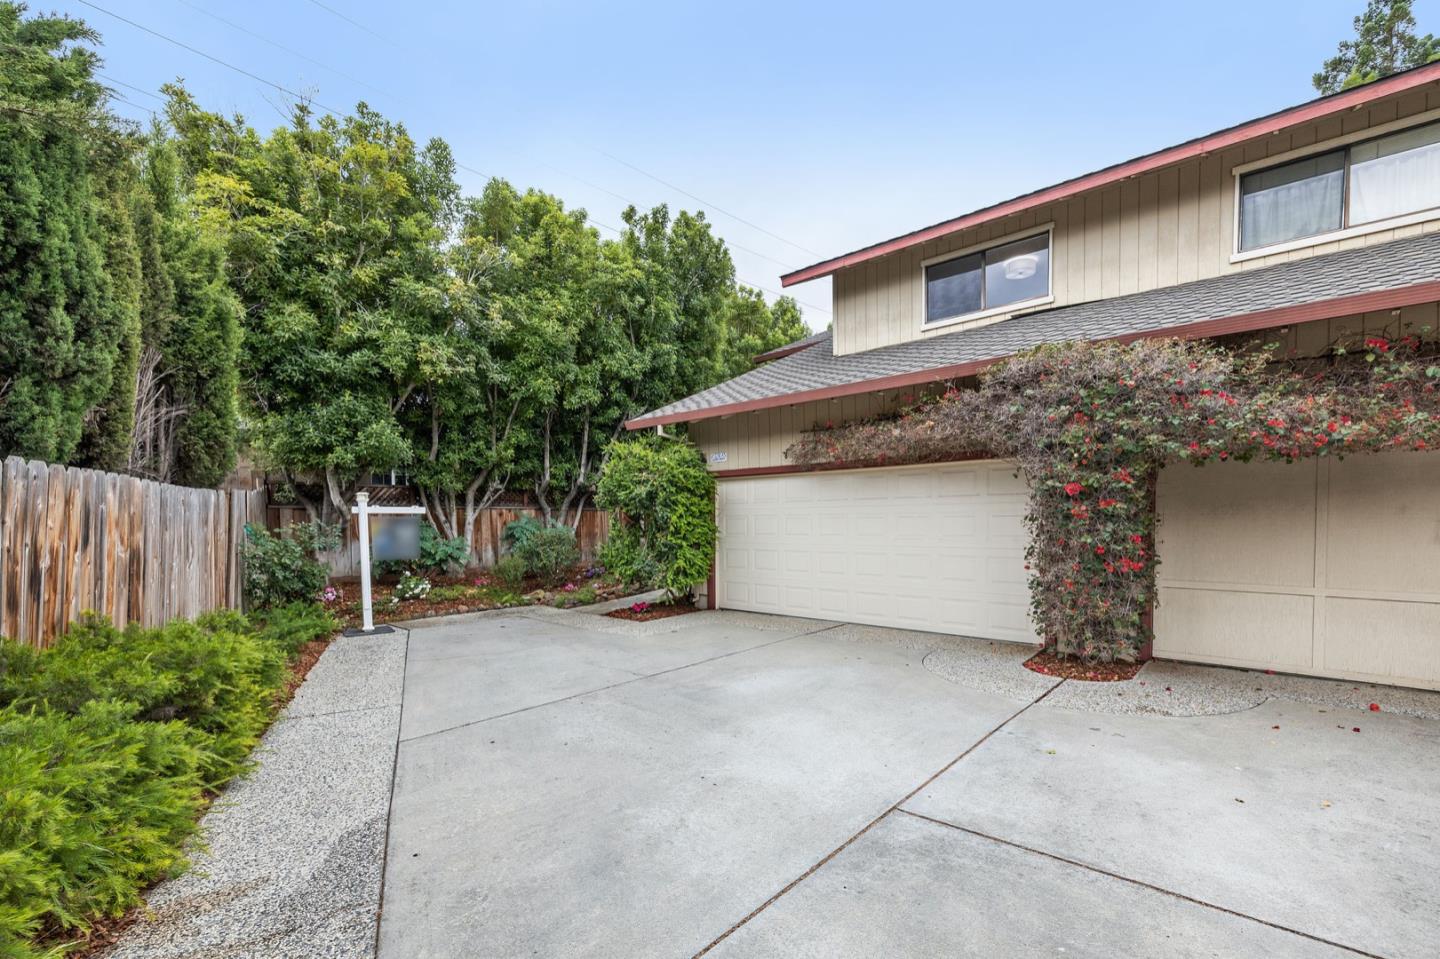 276 Leslie CT A, MOUNTAIN VIEW, CA 94043